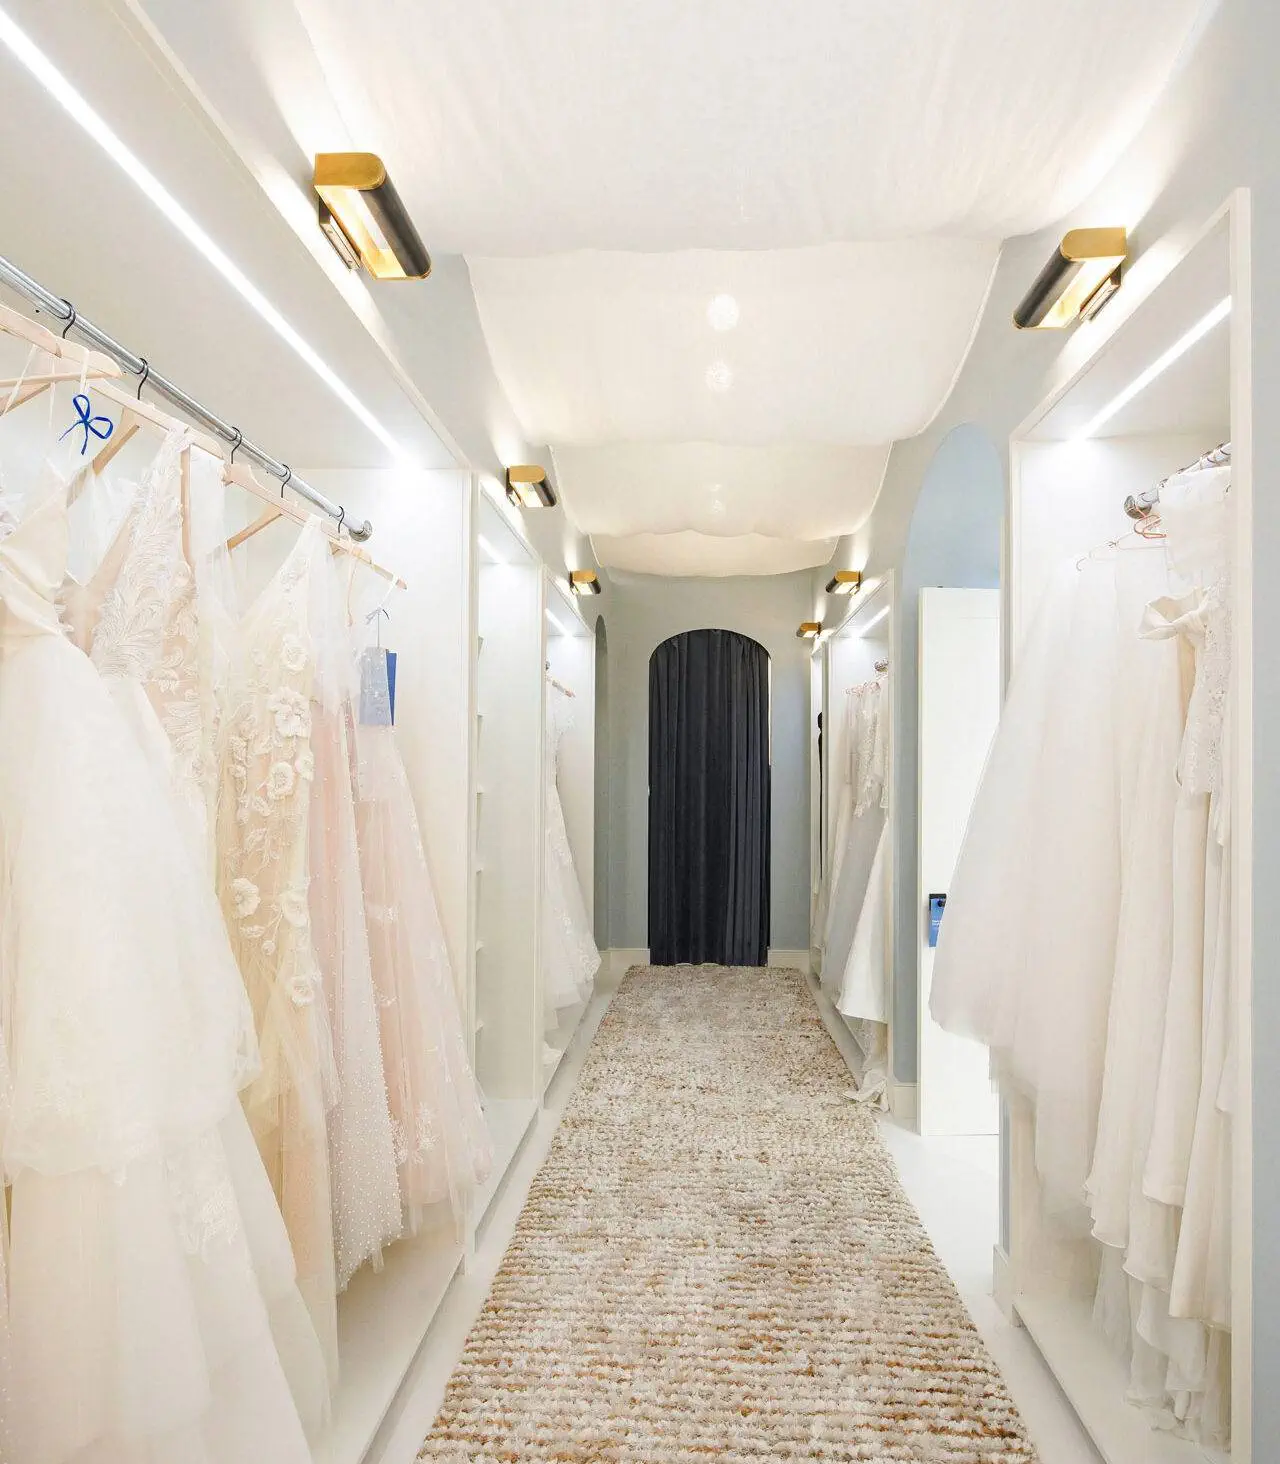 Mandatory Credit: Photo by George Chinsee View of the closet Floravere bridal concept store, New York, USA - 02 May 2019 The Floravere dream closet was inspired by Carrie Bradshaw, Sara Jessica Parker's fashion and shoe-loving character on 'Sex and the City'